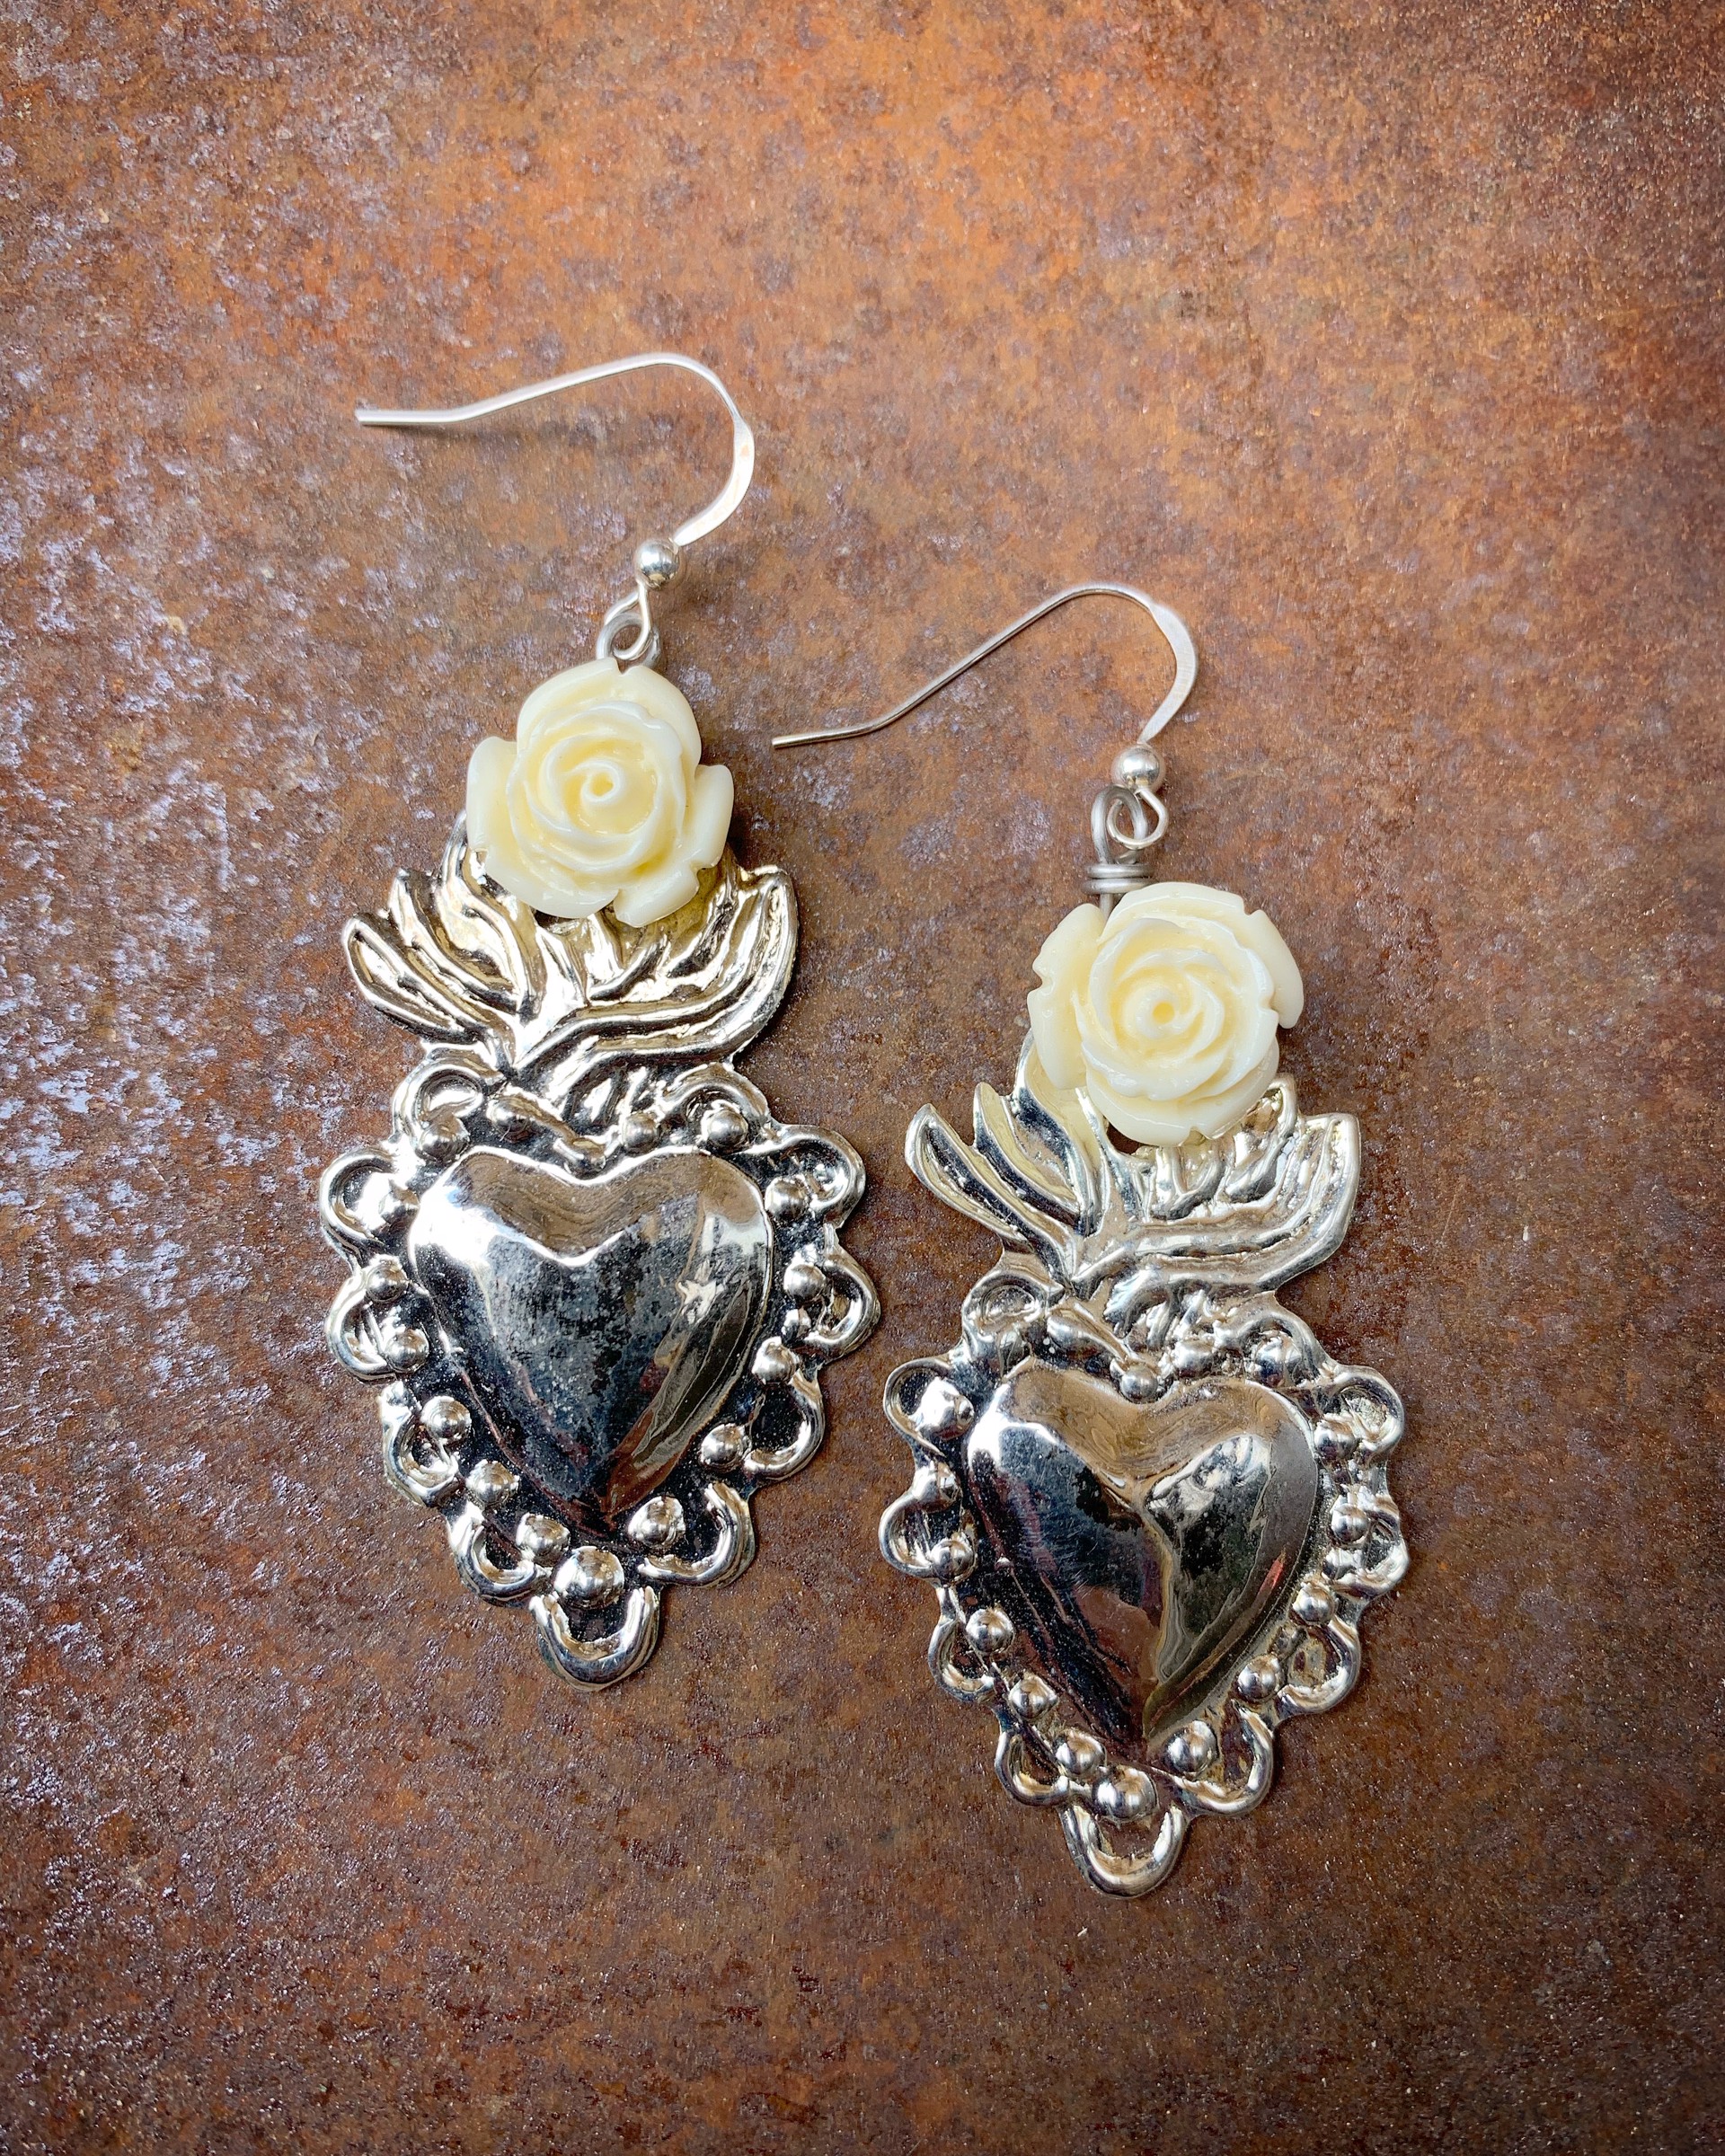 k653 Sacred Hearts white Roses by Kelly Ormsby